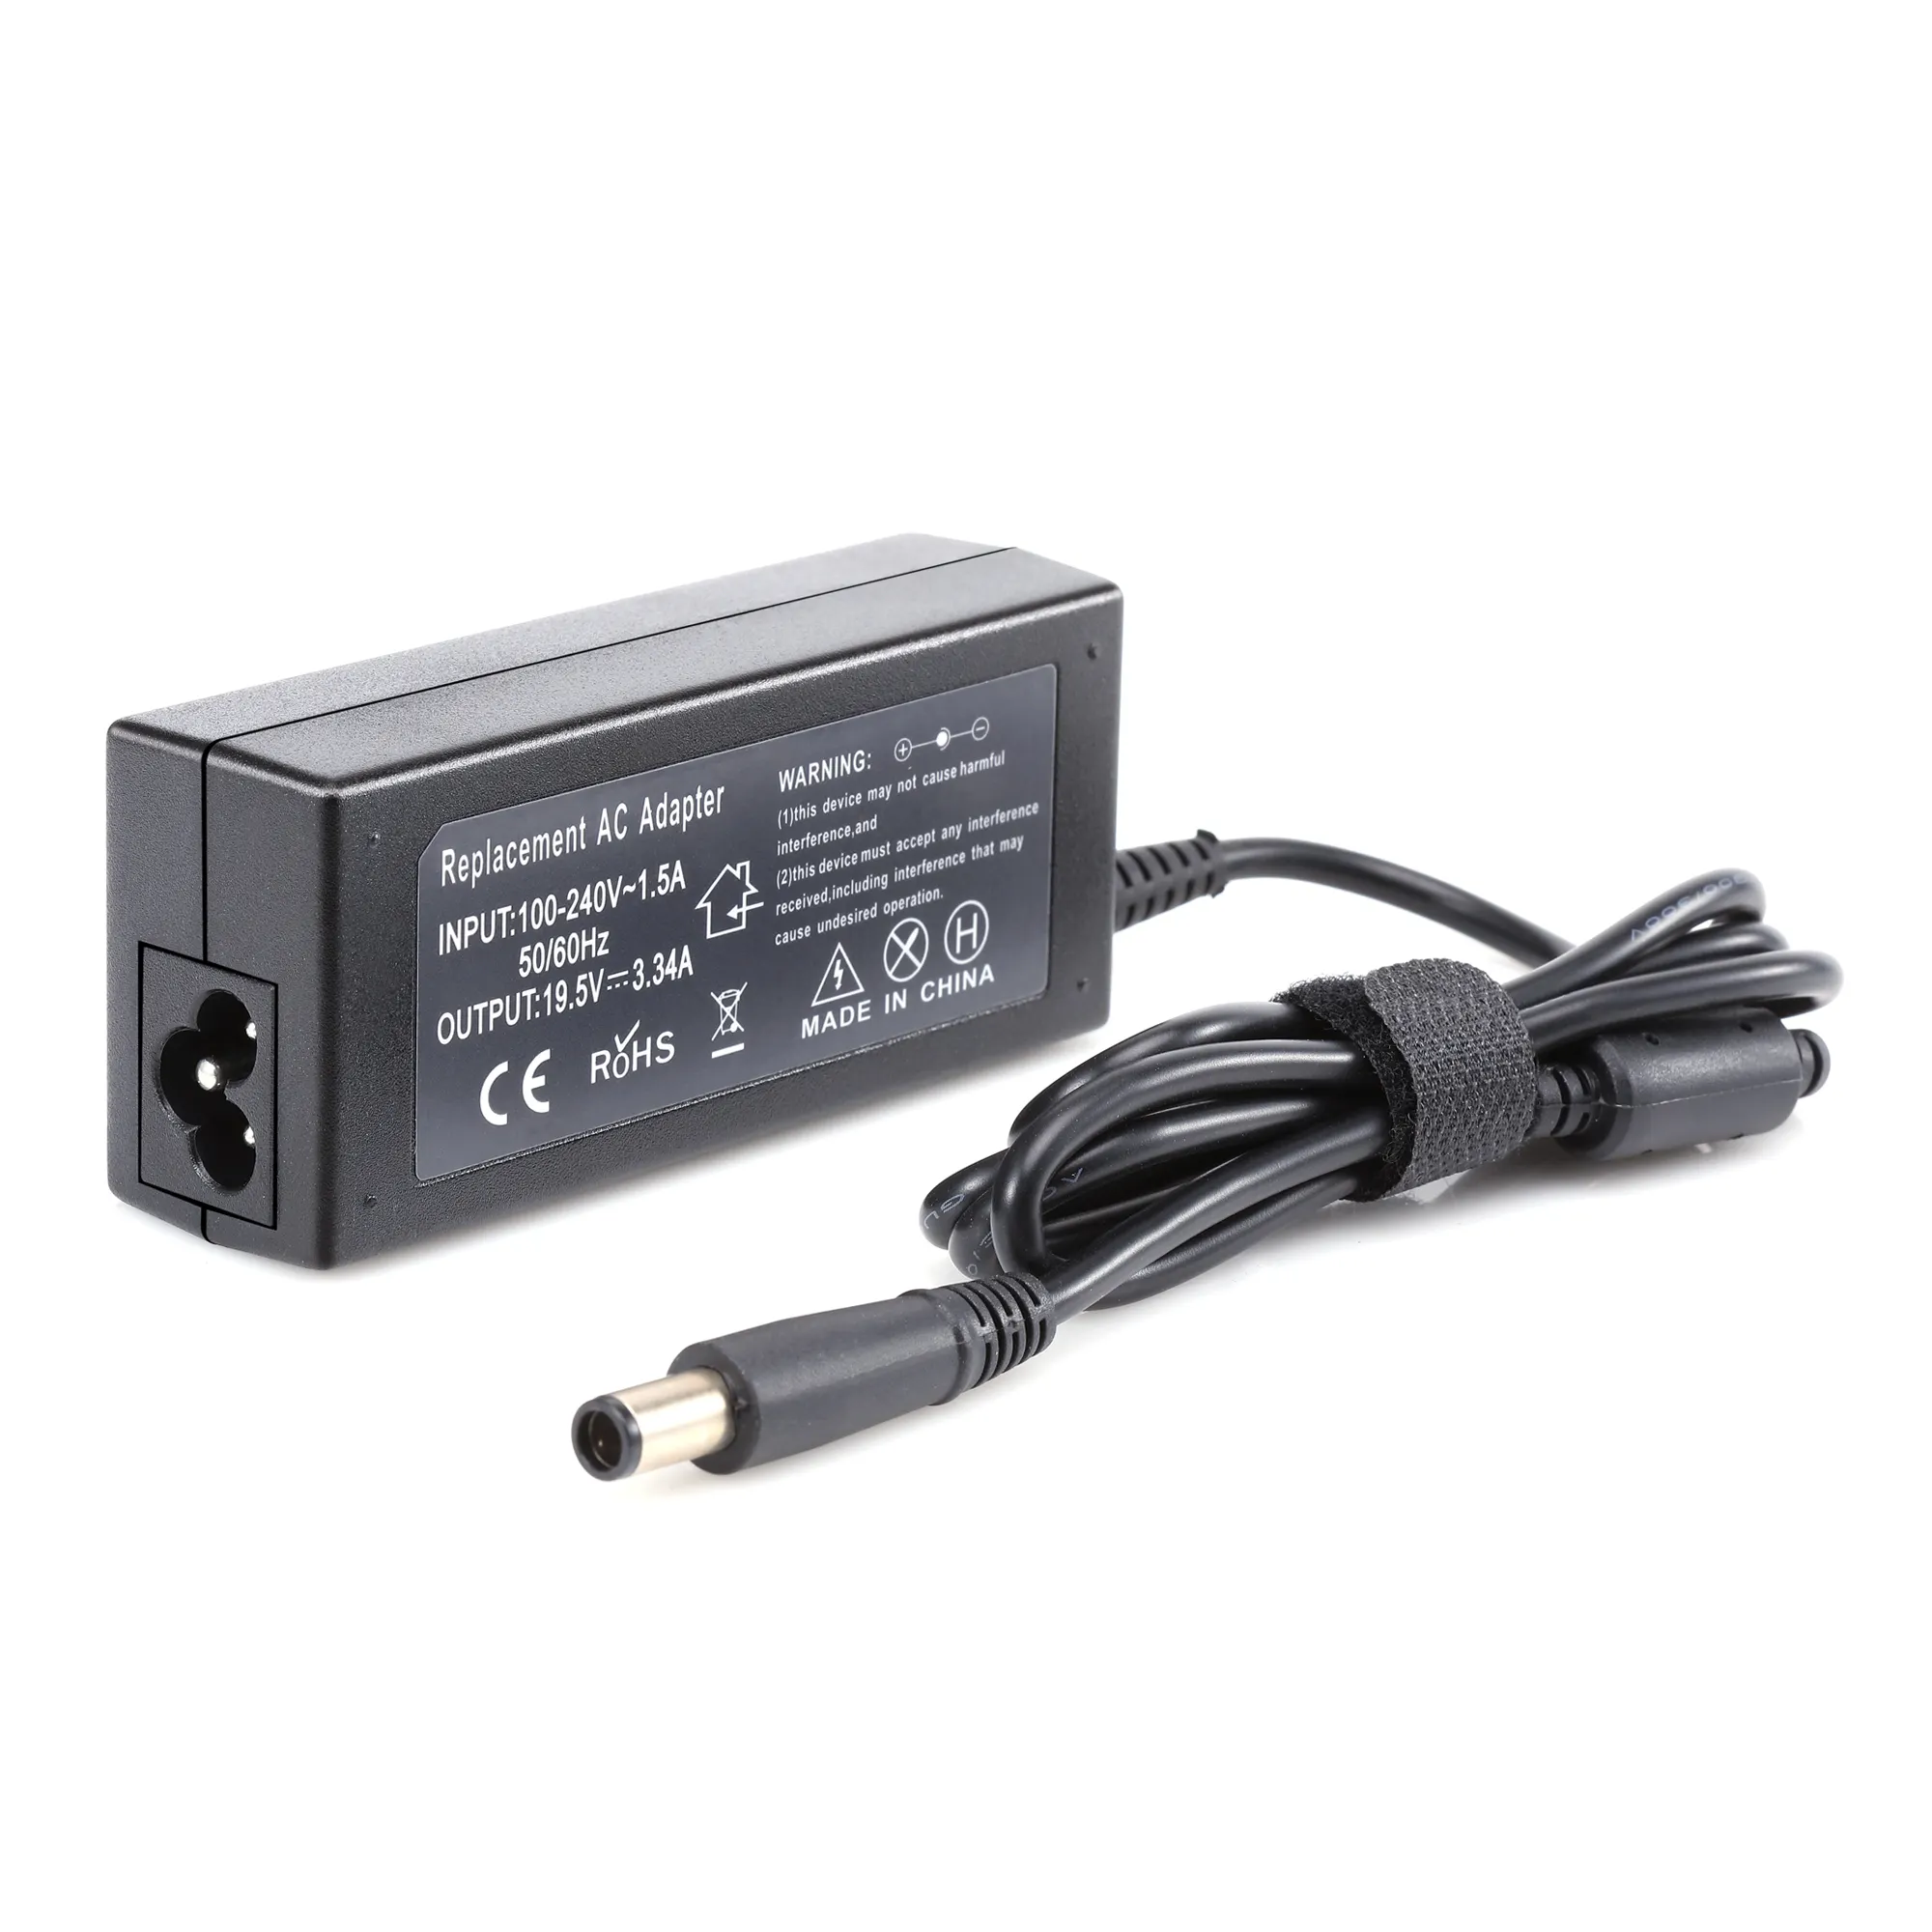 OEM Laptop Charger 65W 19.5V 3.34A Latest Computer Accessories Laptop Adapter For inspiron 13 14 15 17 3000 5000 7000 Series